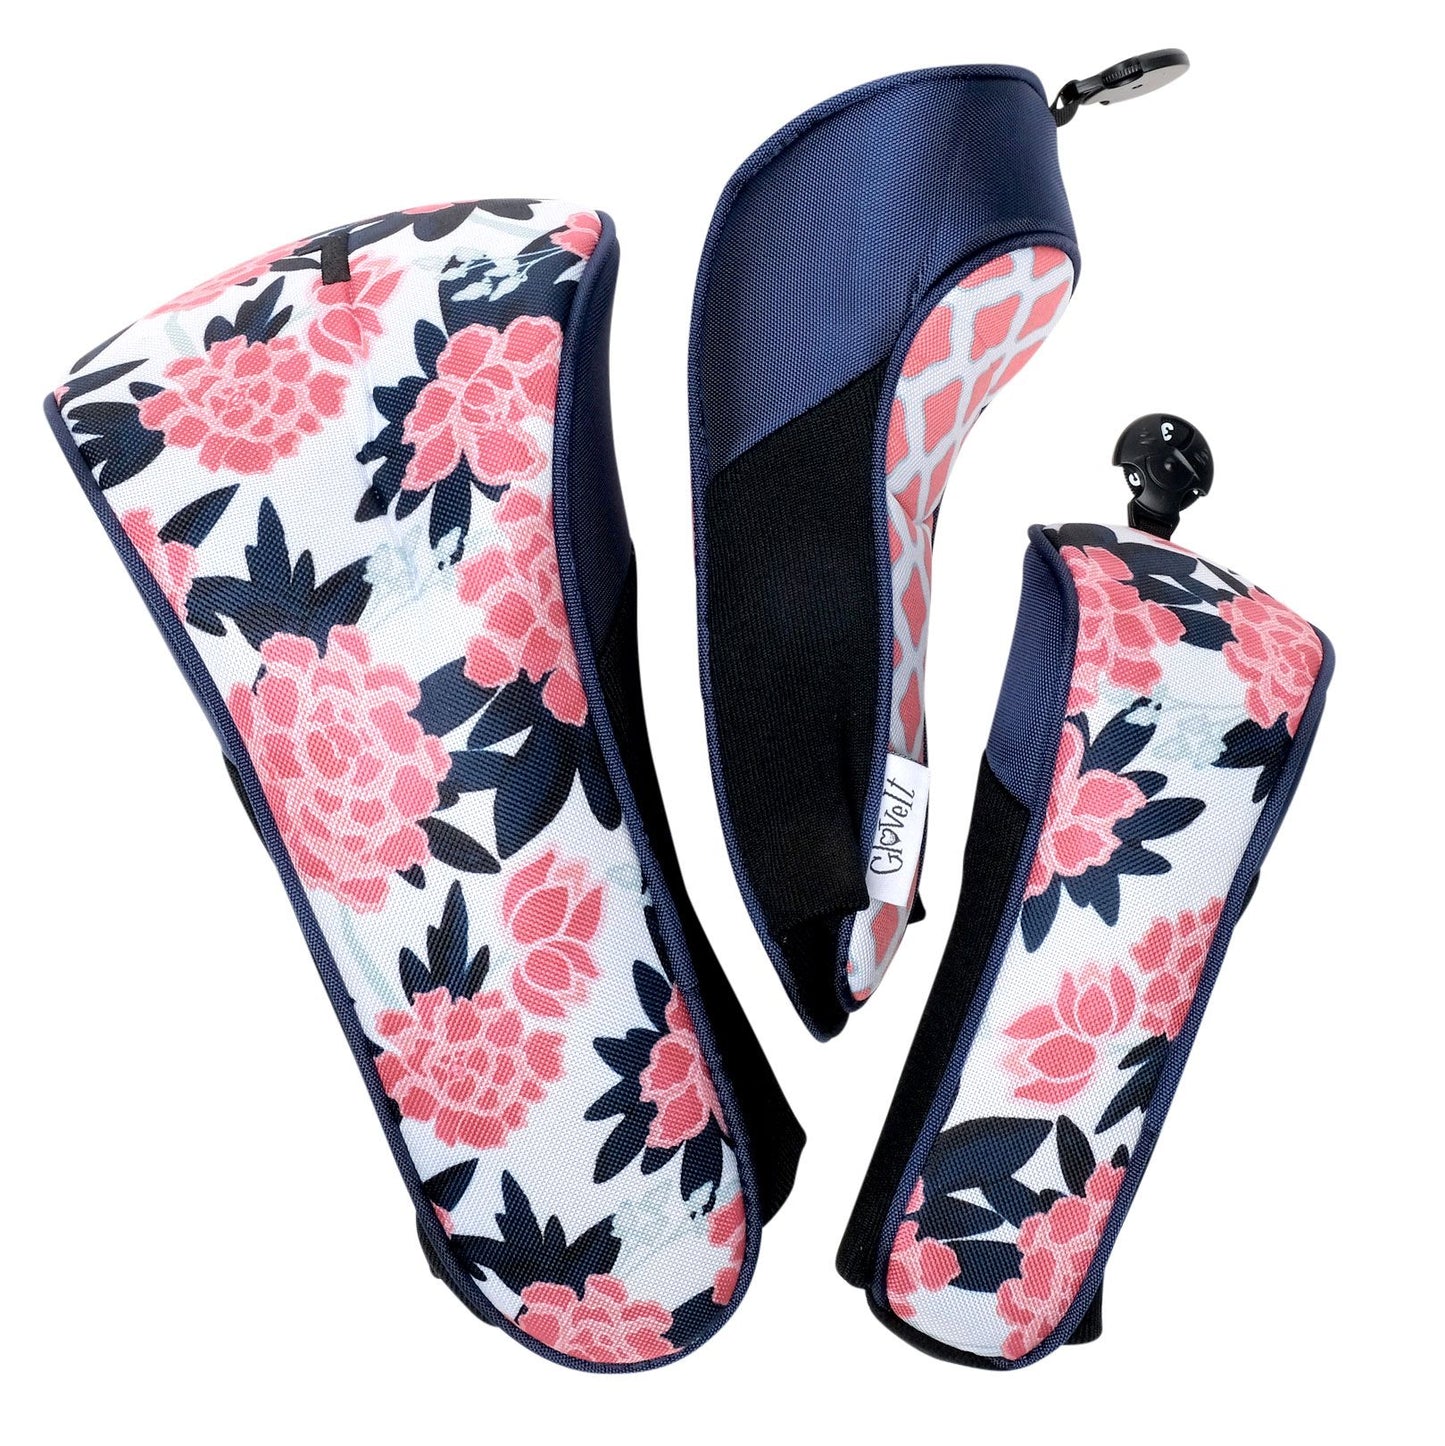 GloveIt Peonies and Pars Golf Club Covers